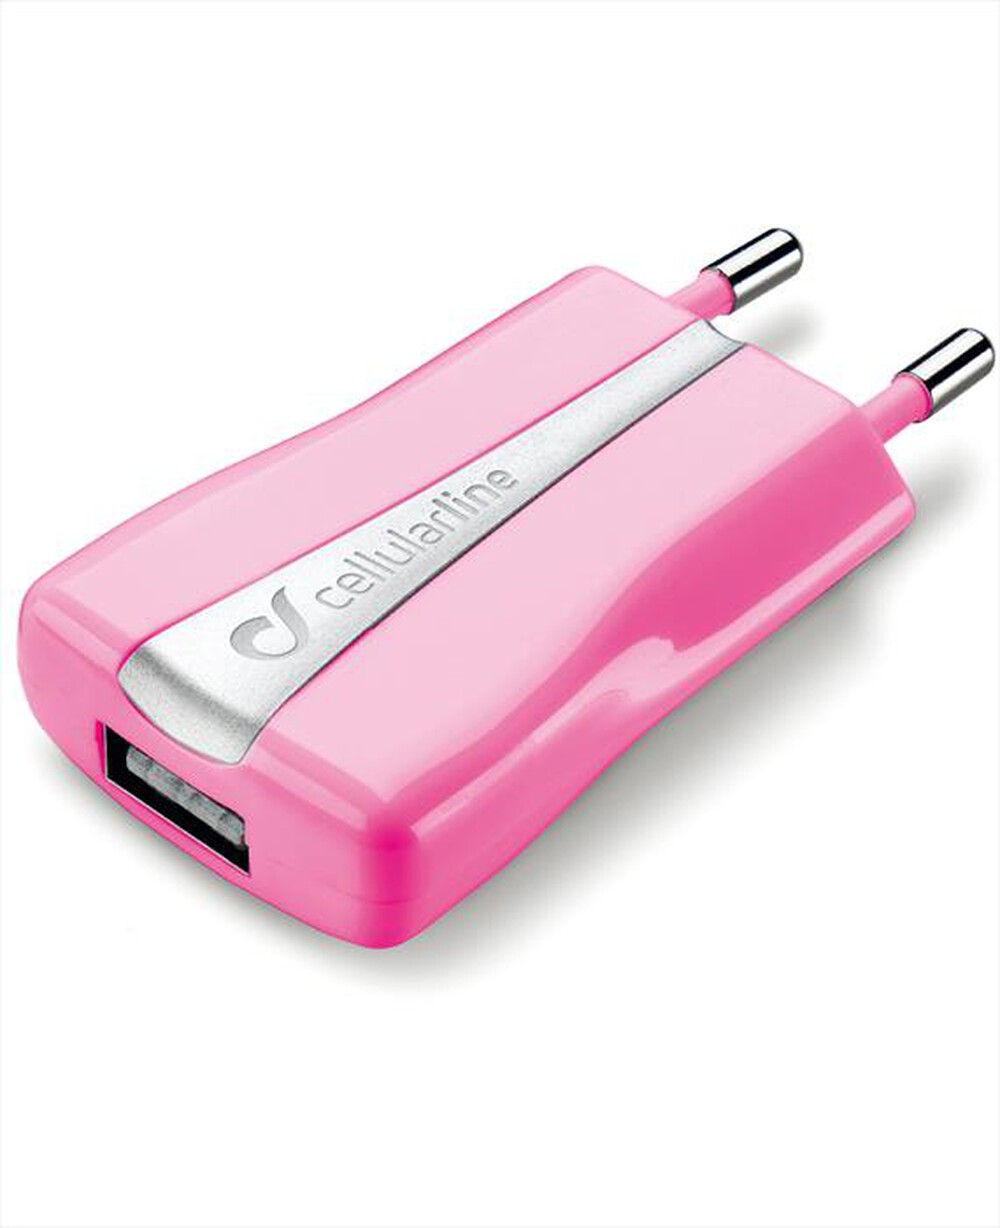 "CELLULARLINE - USB Compact Charger ACHUSBCOMPACTCP - Rosa"